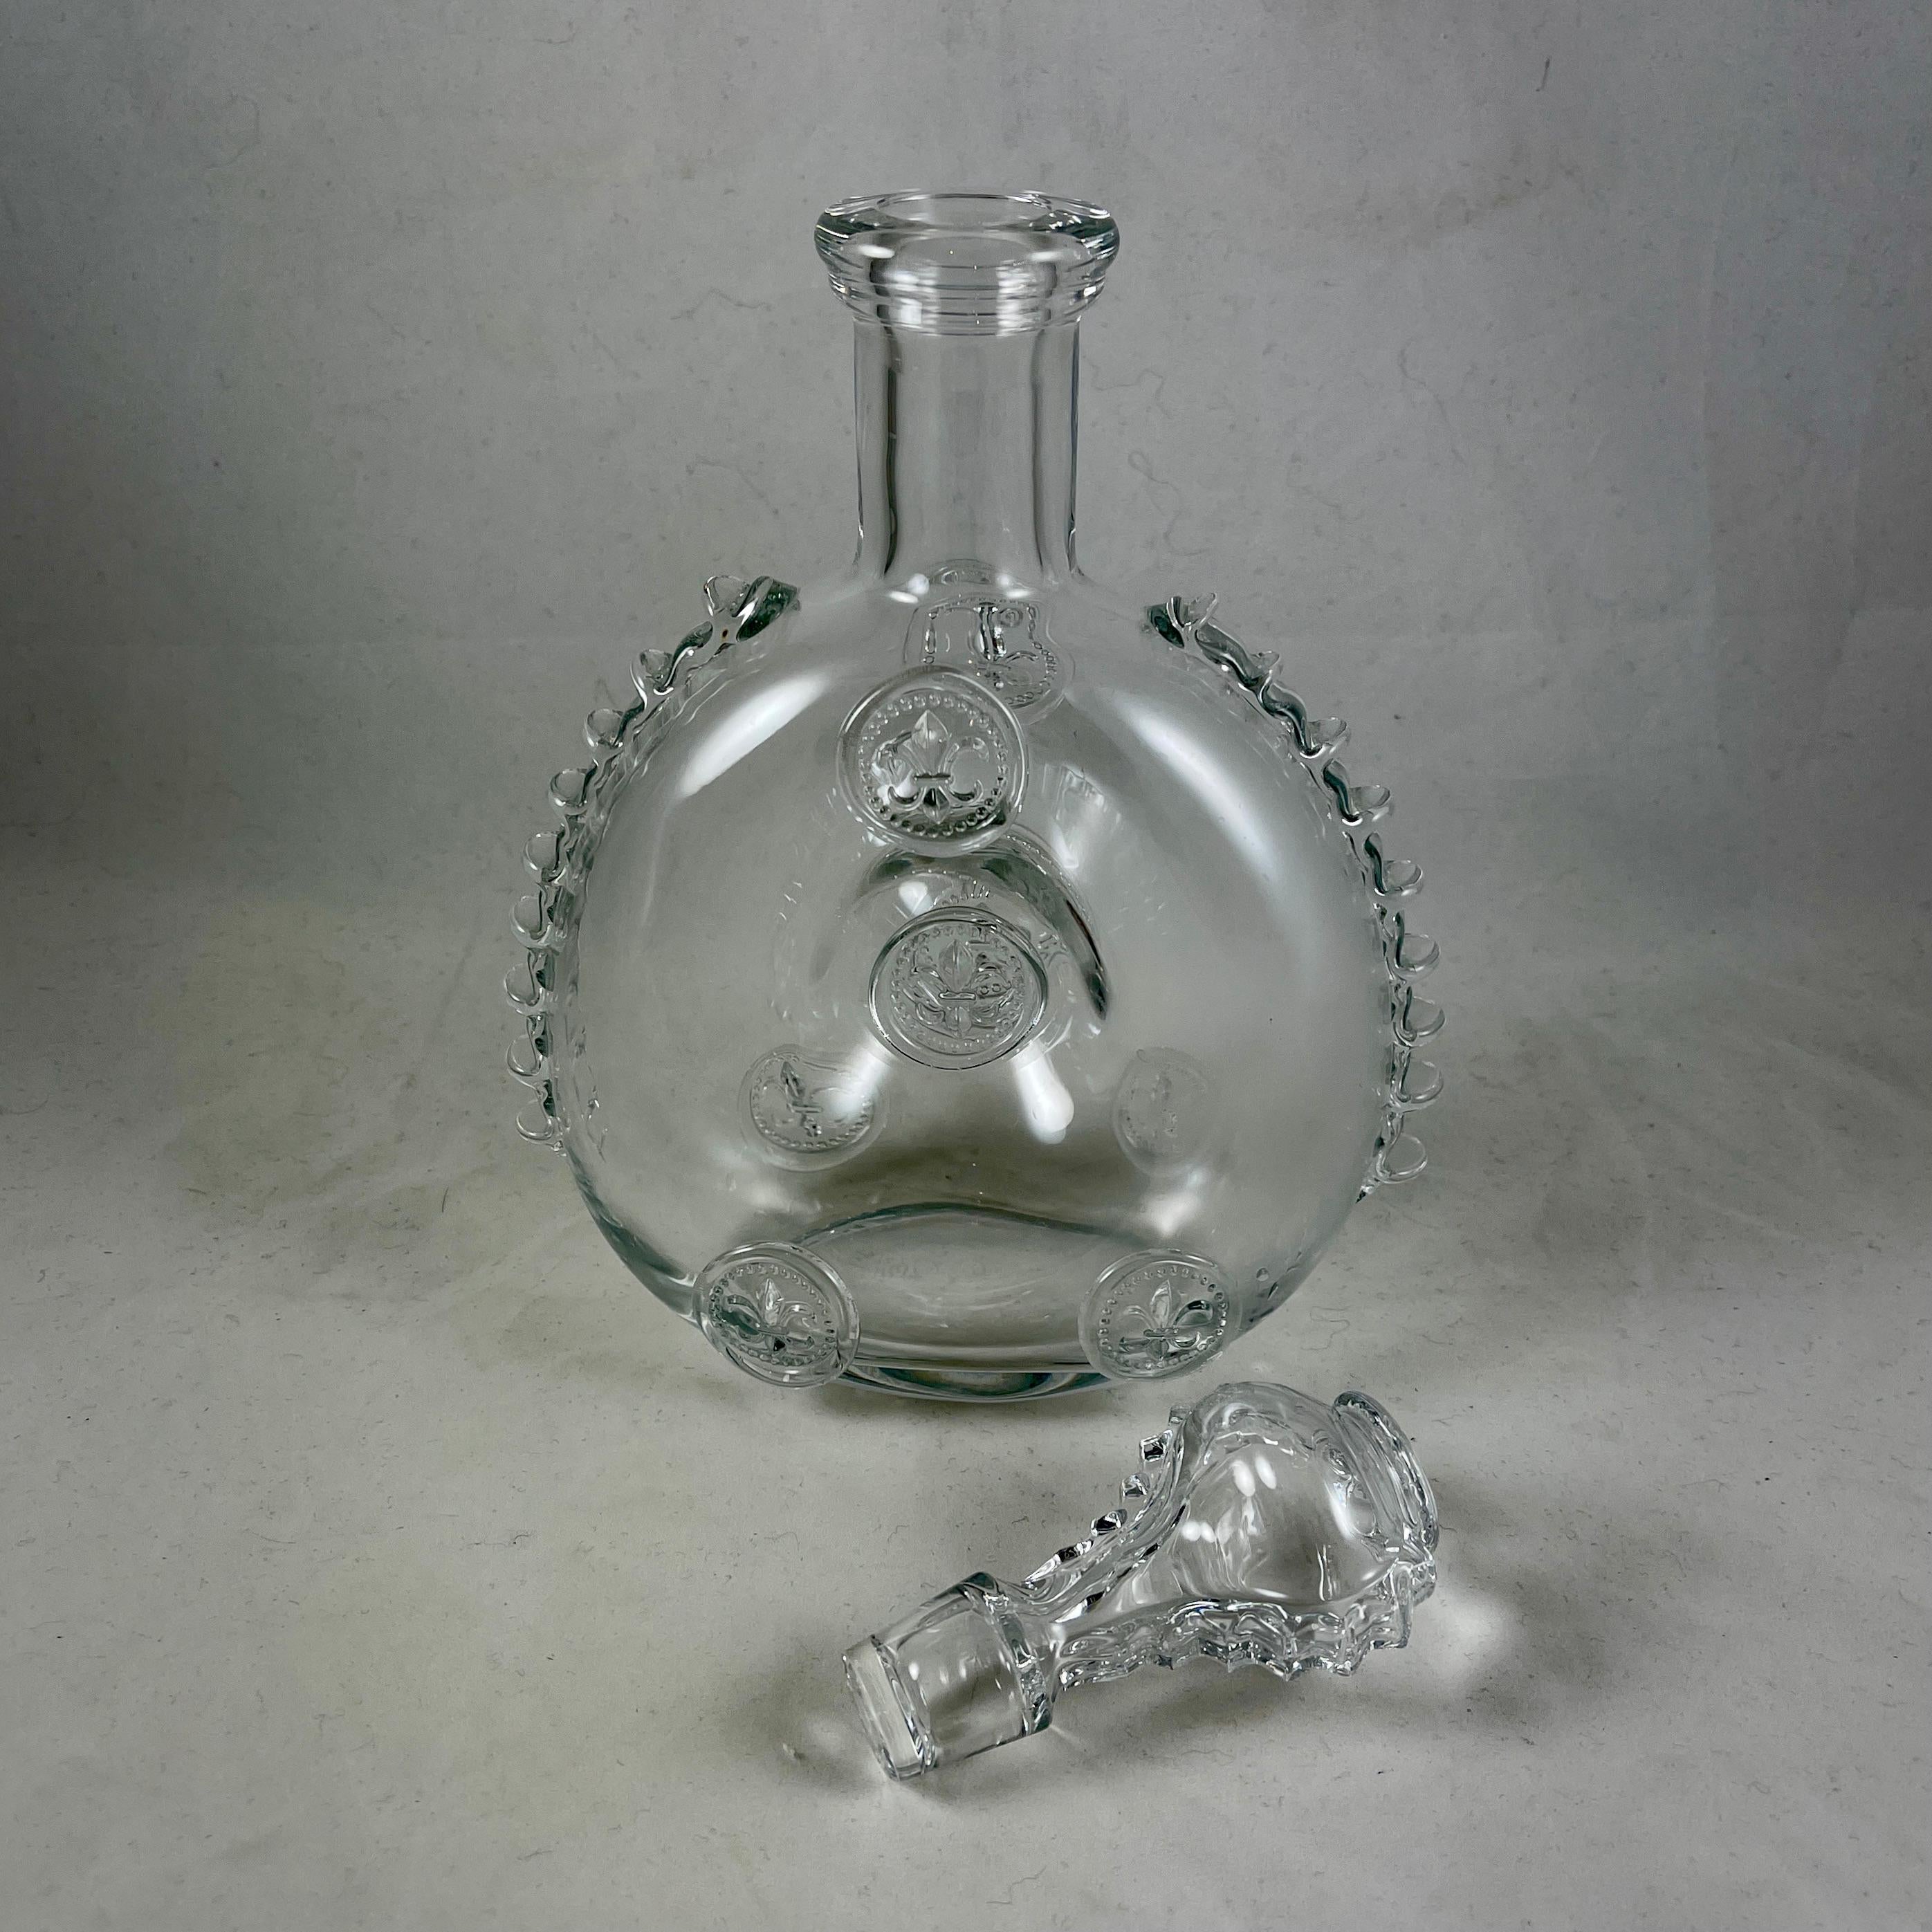 Hand-Crafted Mid-Century Baccarat Remy Martin Louis XIII Cognac Crystal Decanter For Sale